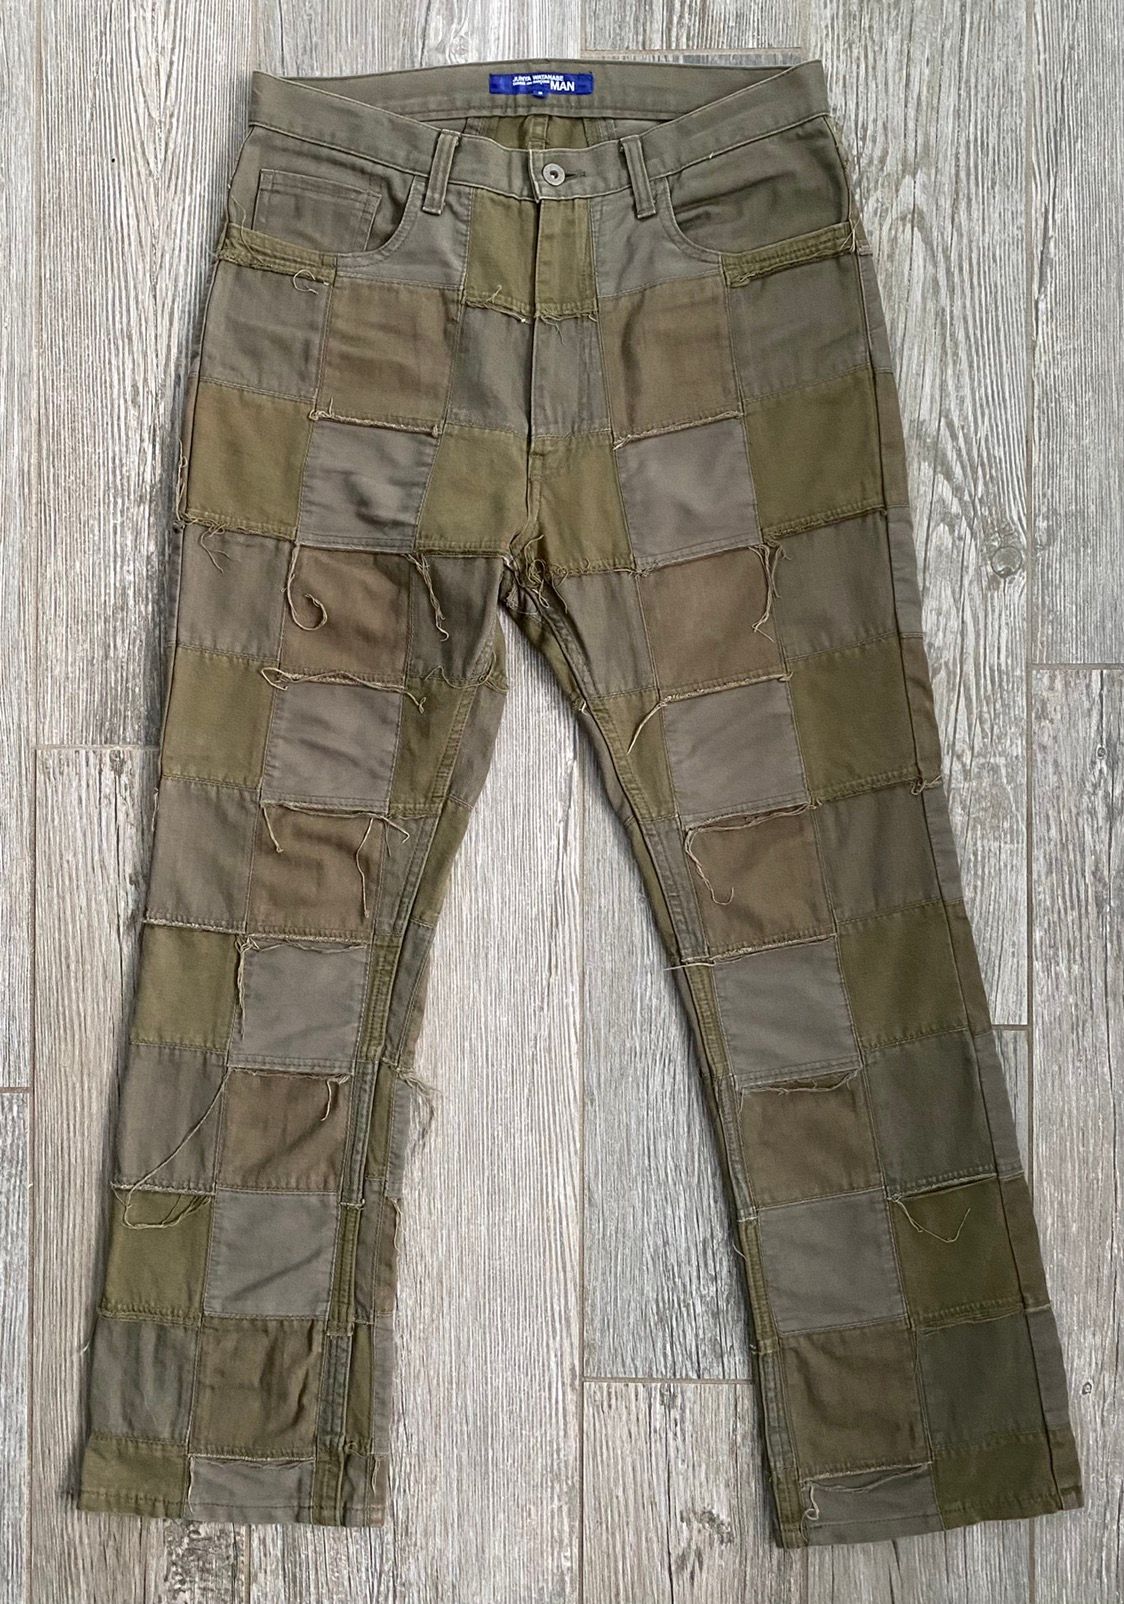 Pre-owned Comme Des Garcons X Junya Watanabe 2006 Junya Watanabe Comme Des Garcons Olive Patchwork Pants